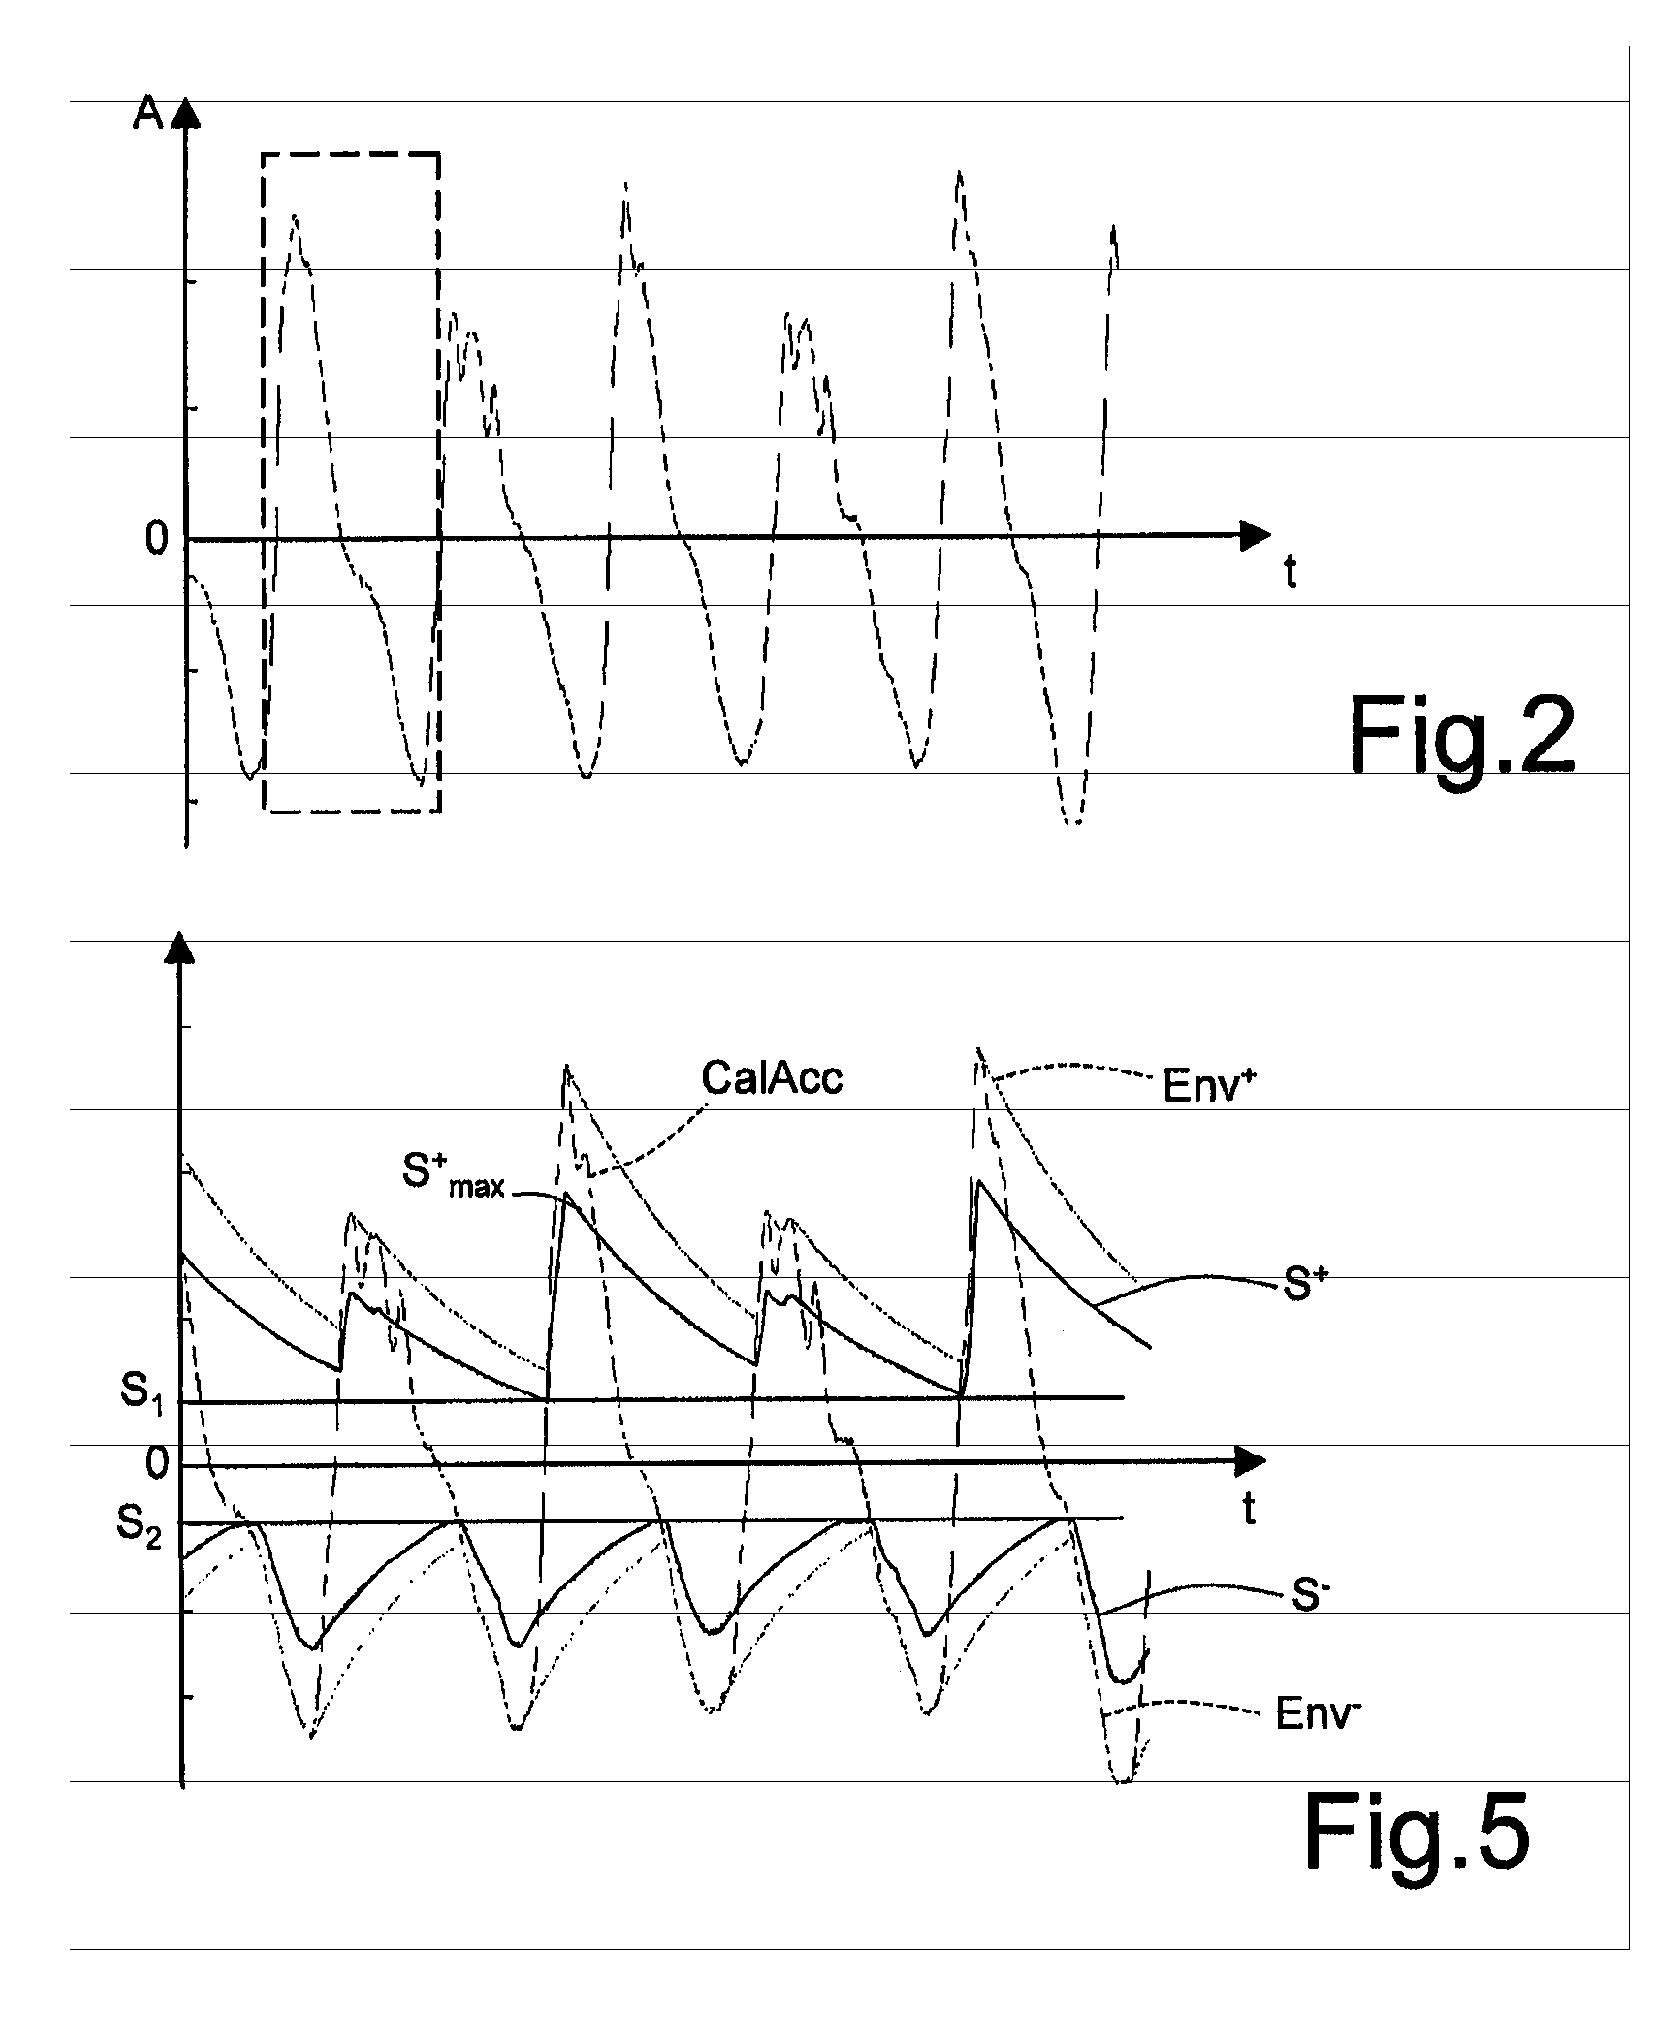 Pedometer device and step detection method using an algorithm for self-adaptive computation of acceleration thresholds